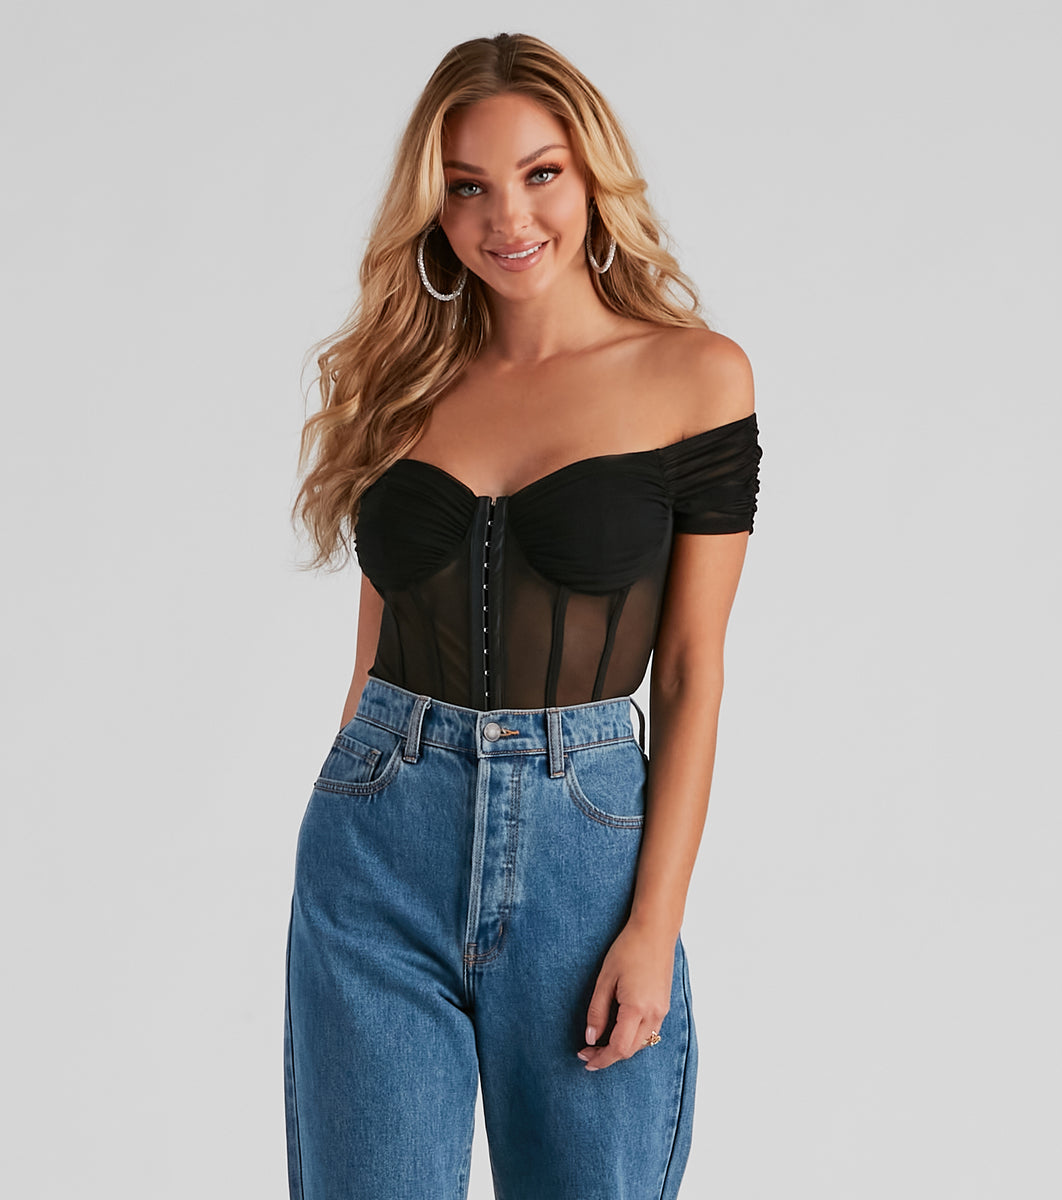 Gilly Hicks cutout bustier cotton bodysuit in black